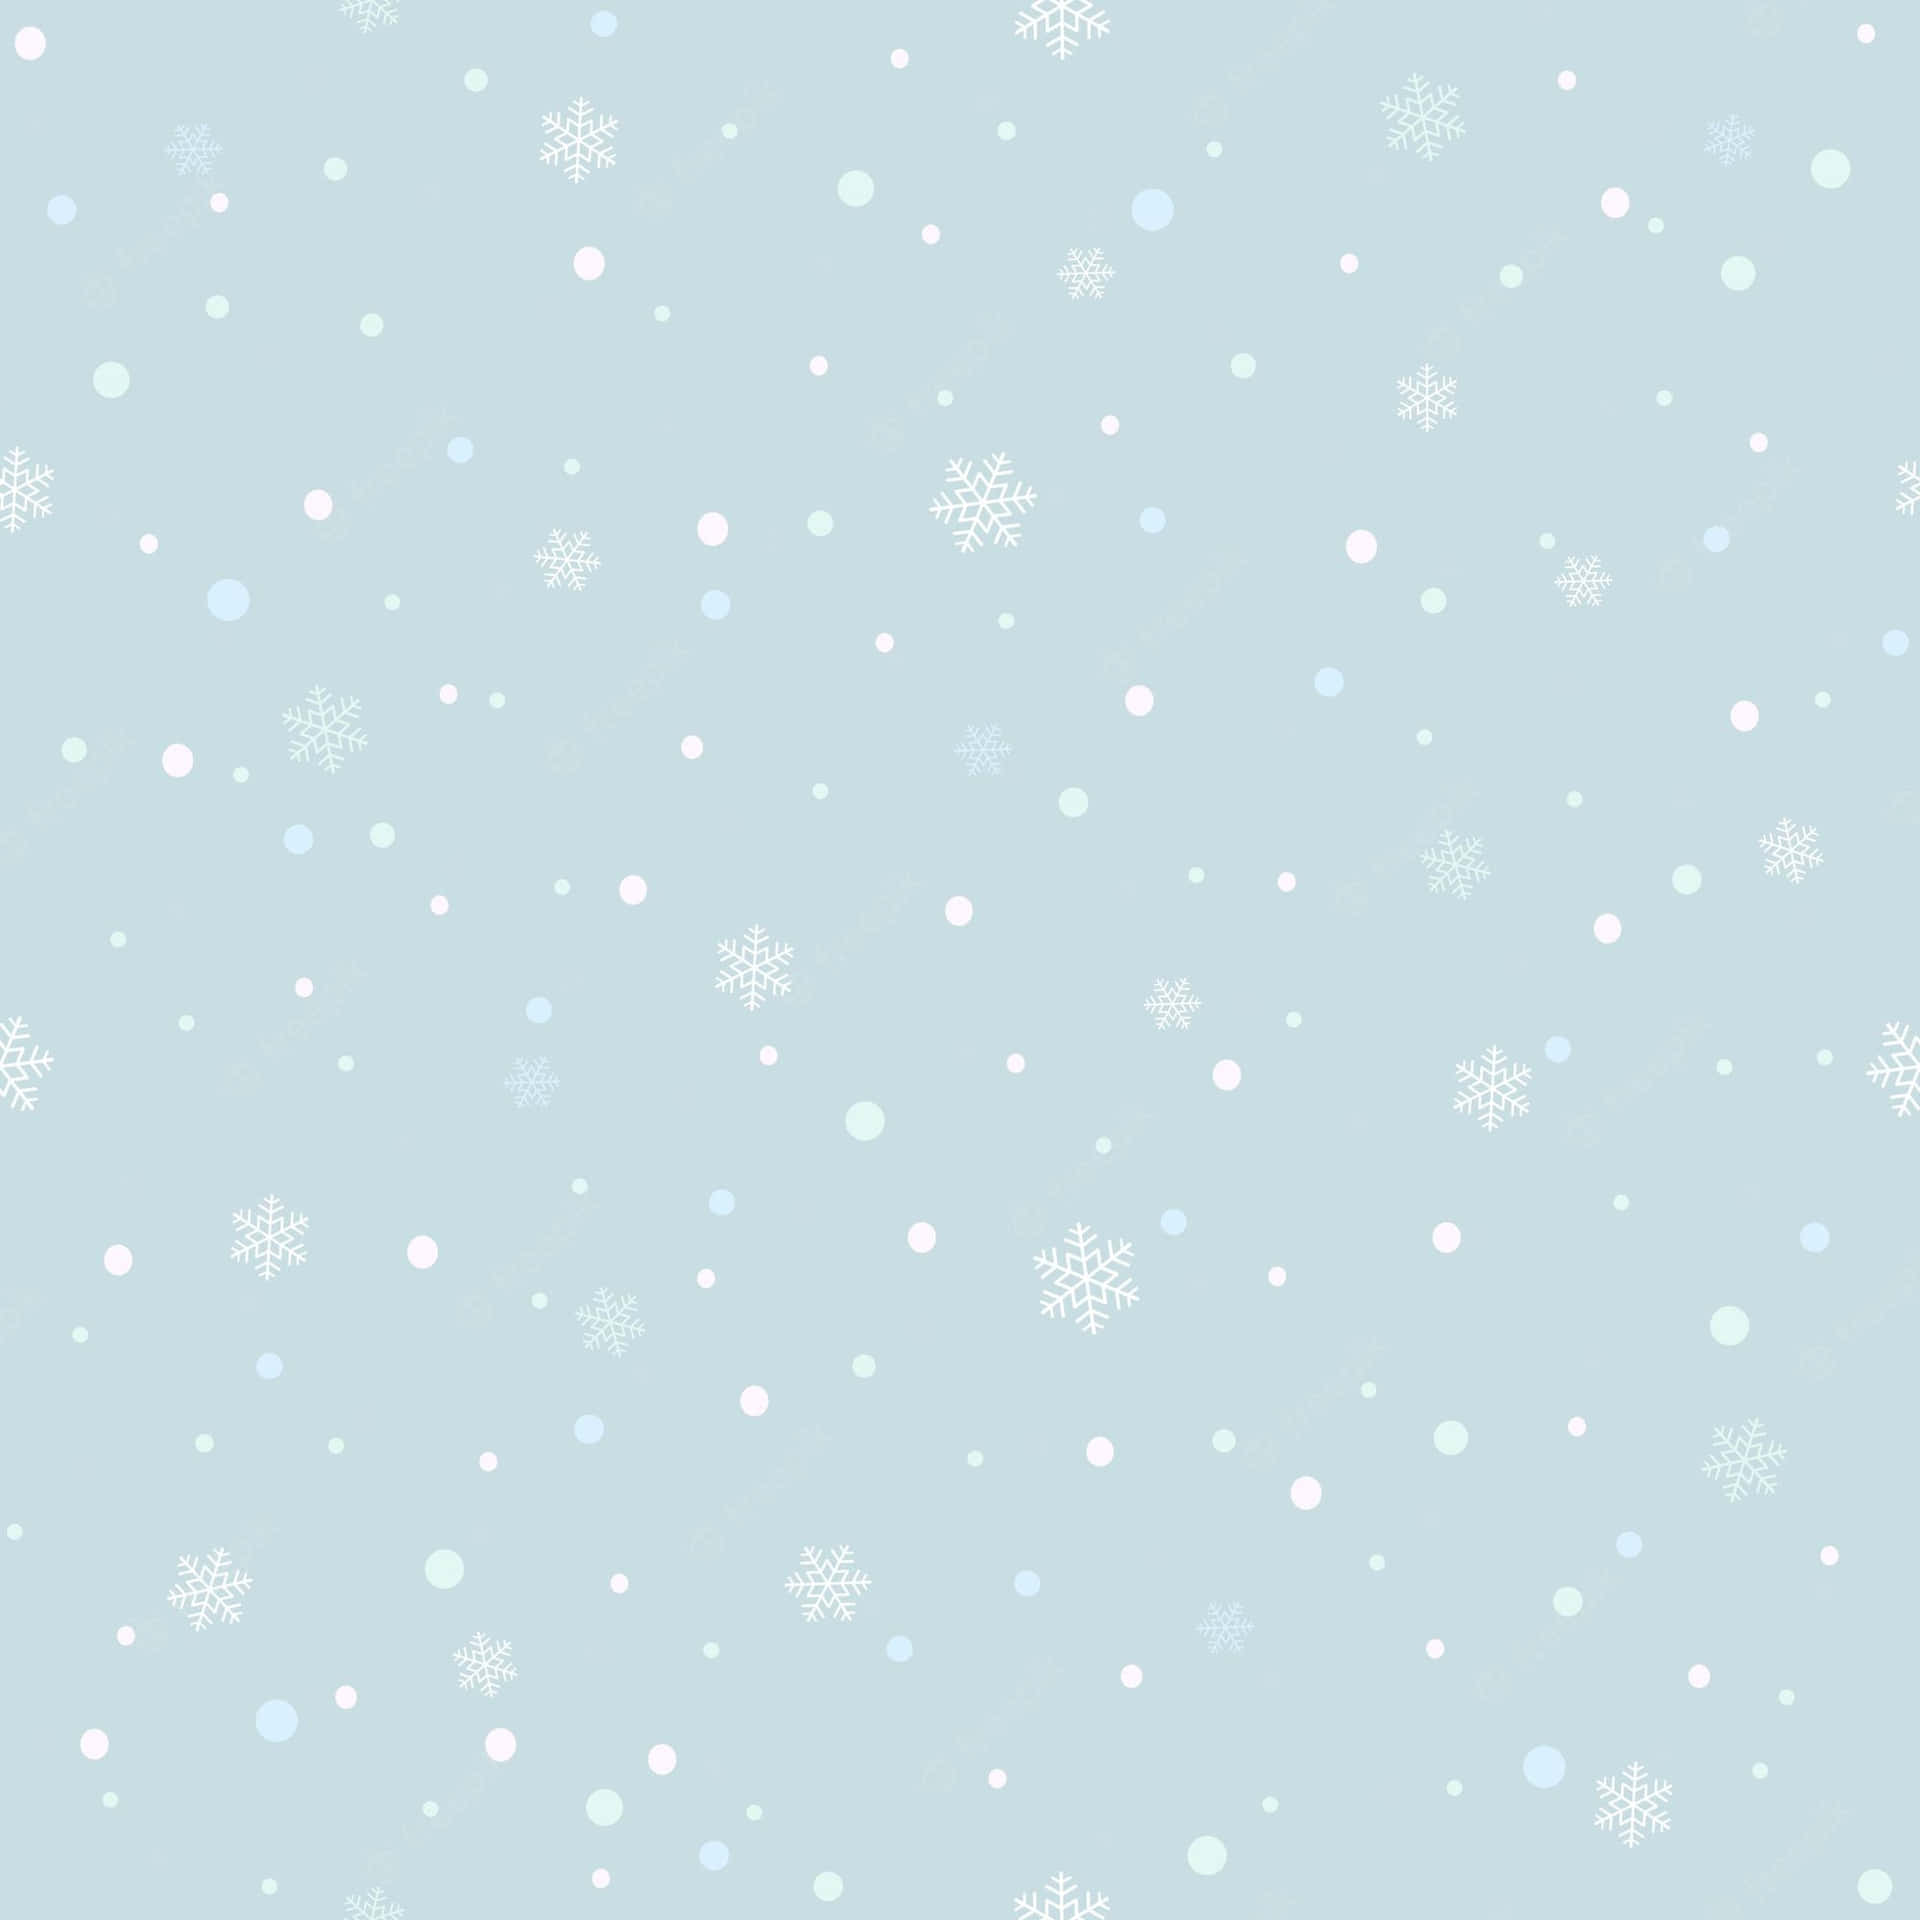 Deep Blue Christmas Background With Snowflakes